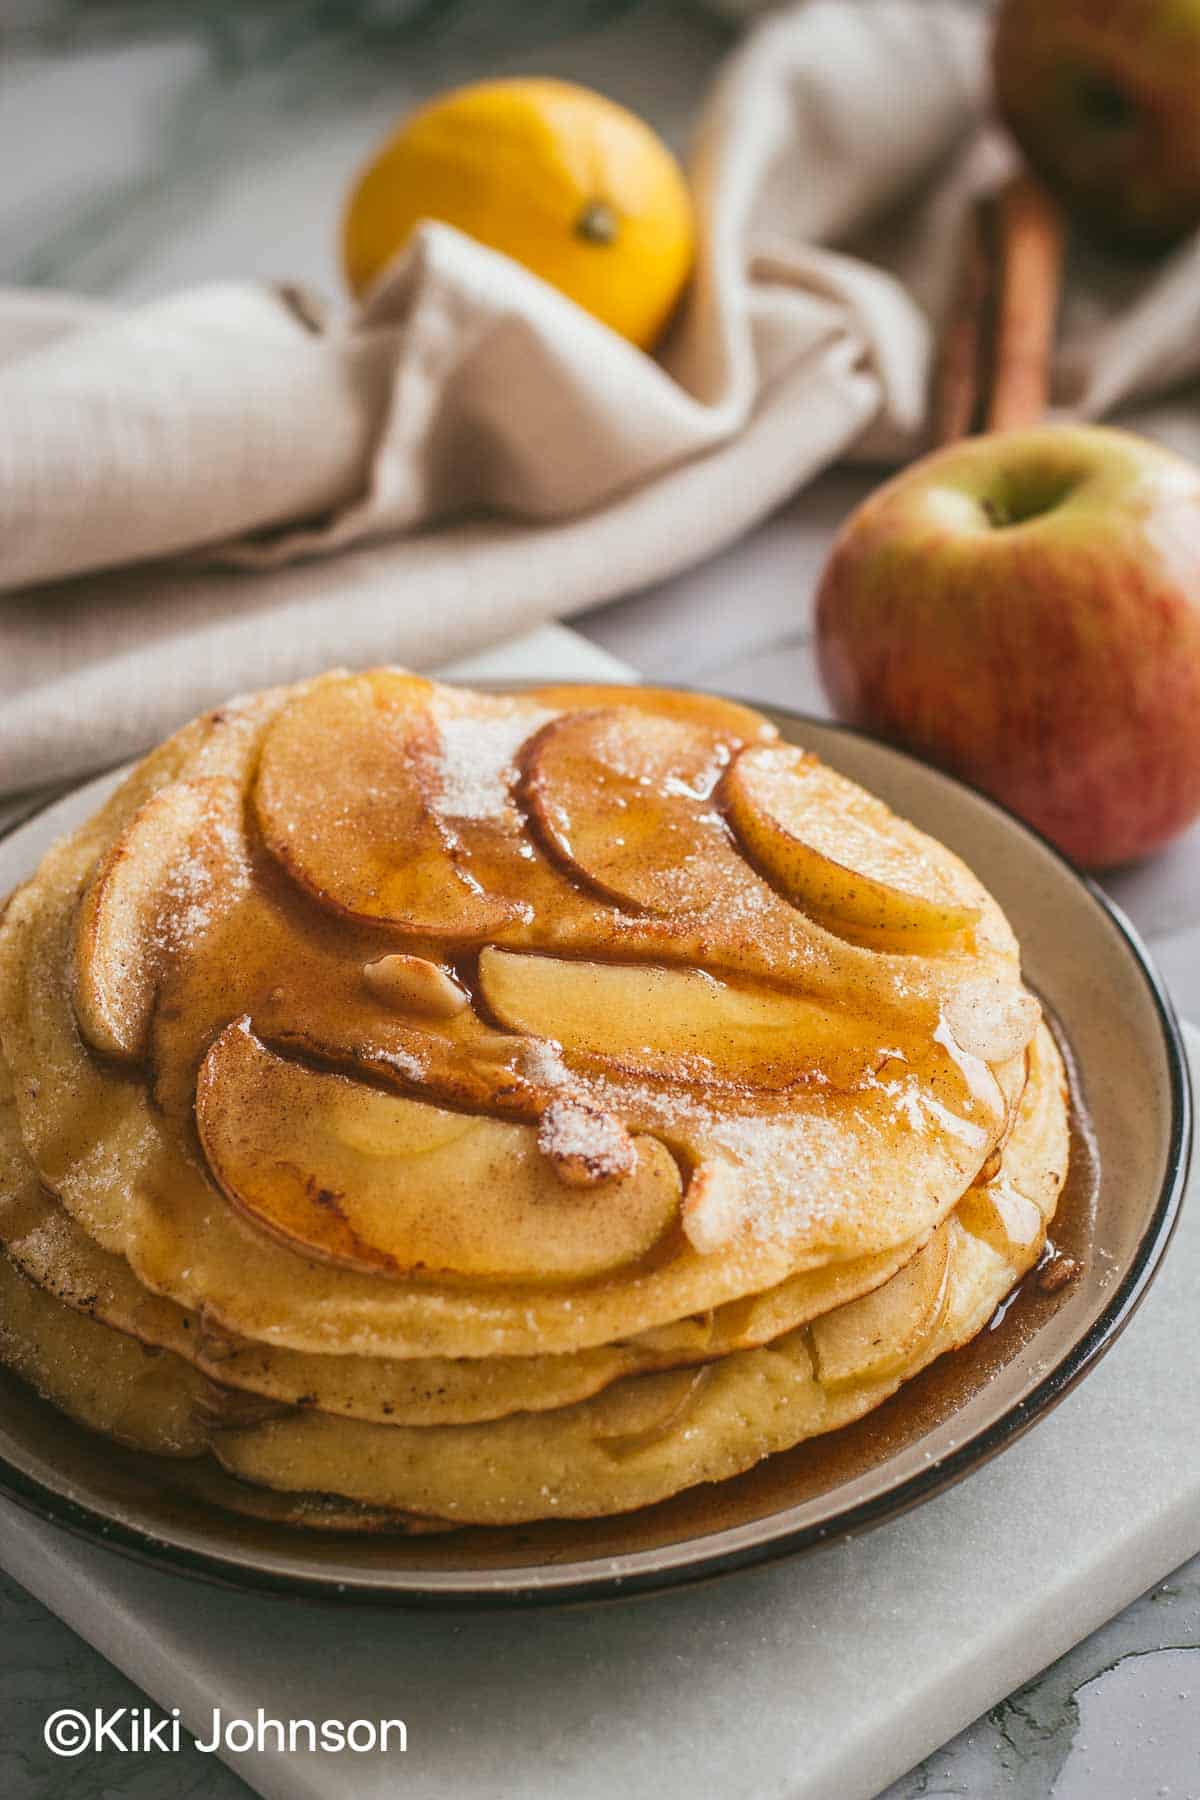 a stack of grannys pancakes with fresh apples on a plate